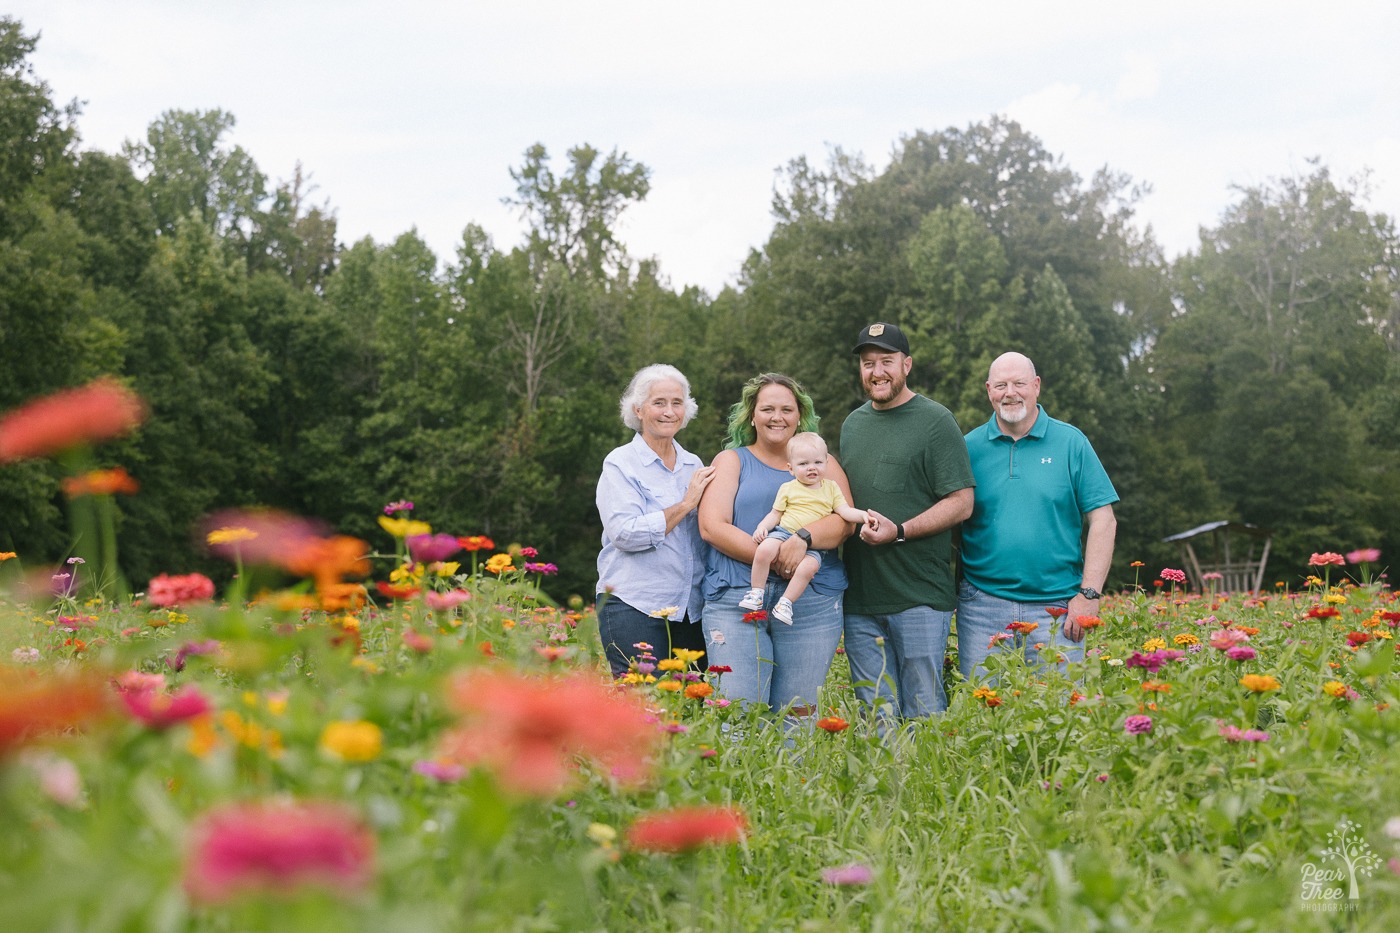 Multi-generational photo of one year hold, parents, and grandparents in a wildflower field